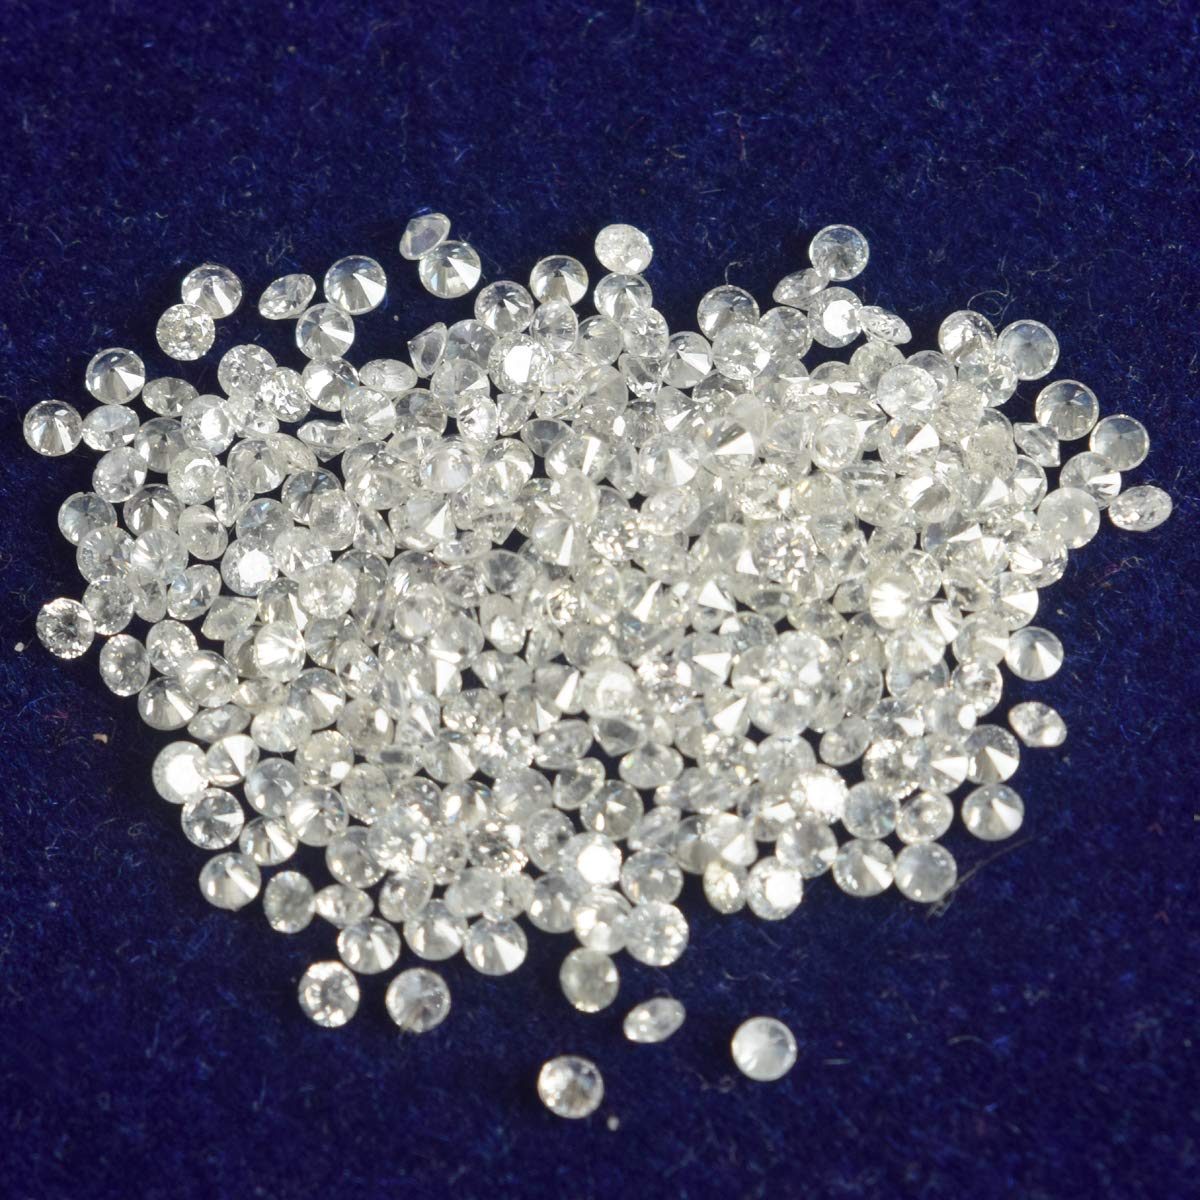 GEMHUB Natural Loose Diamonds Round Shape GH White Color SI Clarity 0.50 to 1.3 MM 50 Pcs Lot